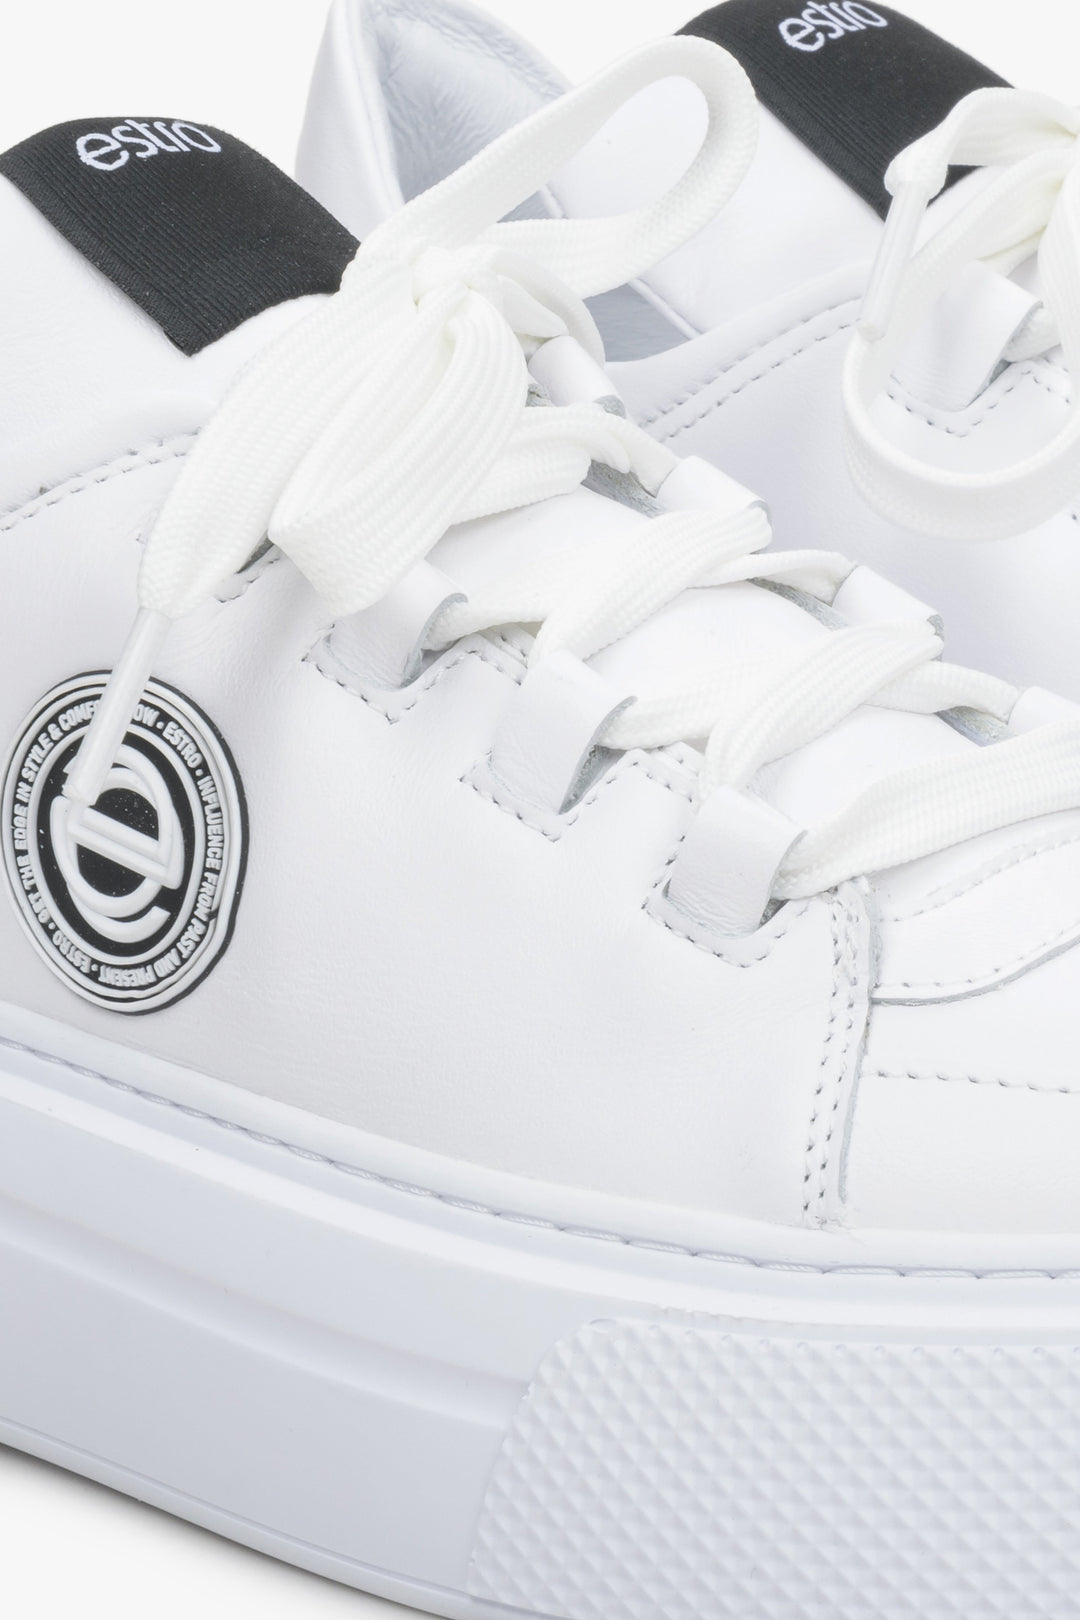 Women's white sneakers made of genuine leather - close-up on details.